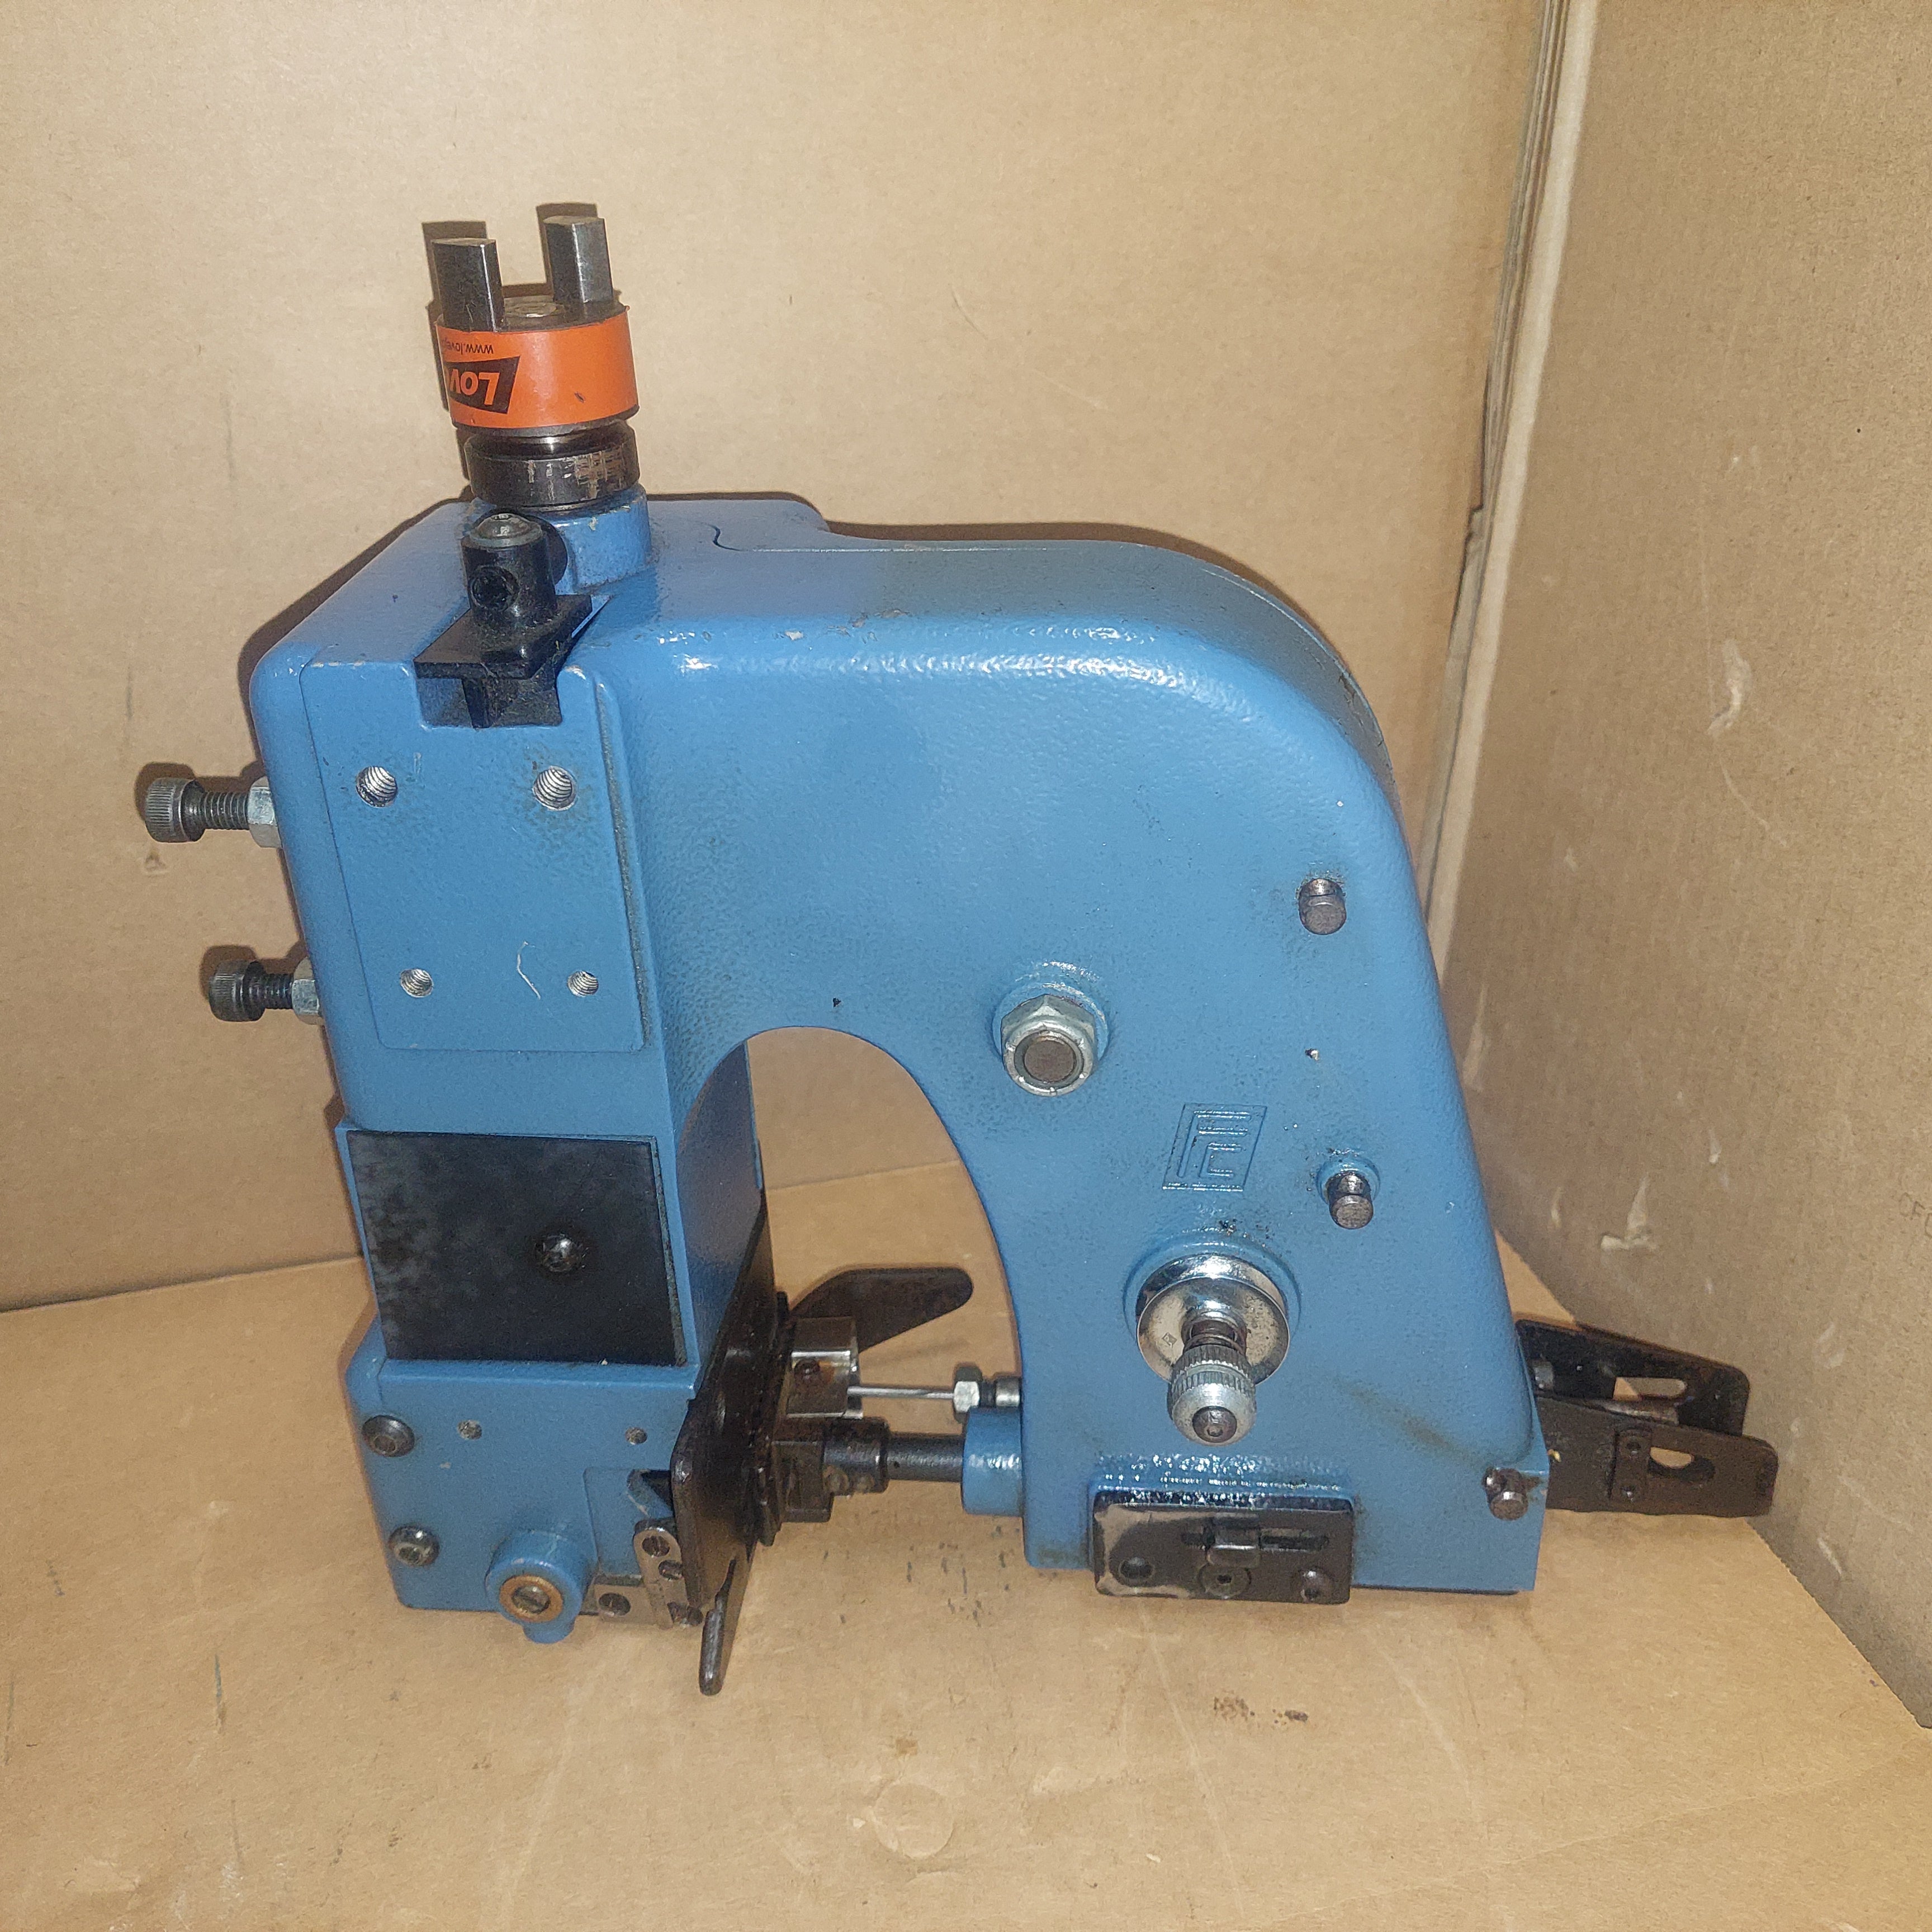 Fischbein Bag Closer Model F Was Machine Mounted & Parts Used